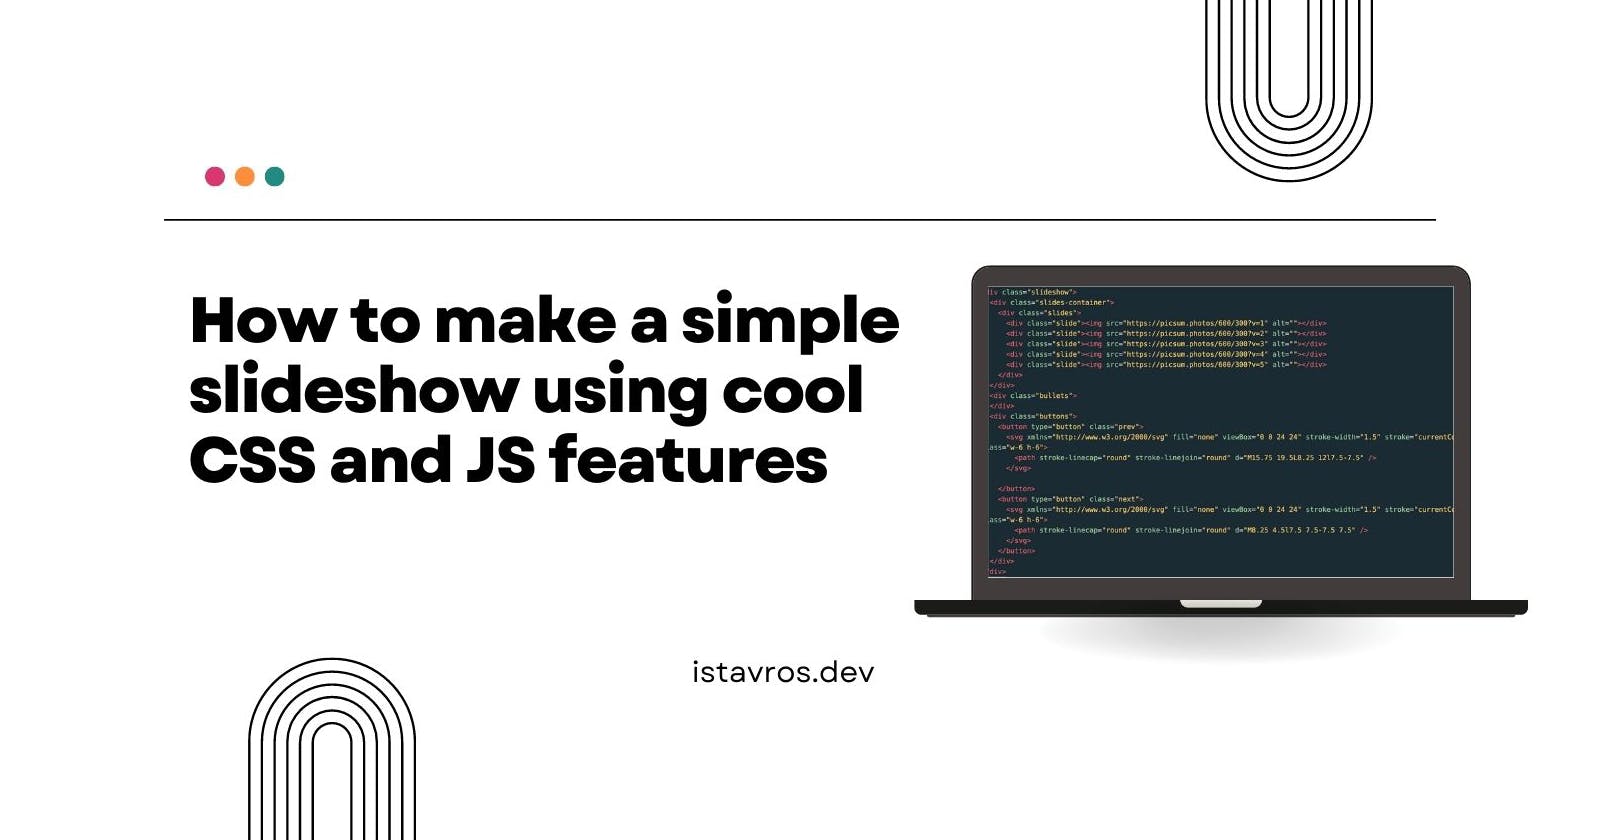 How to make simple slideshow using cool CSS and JS features